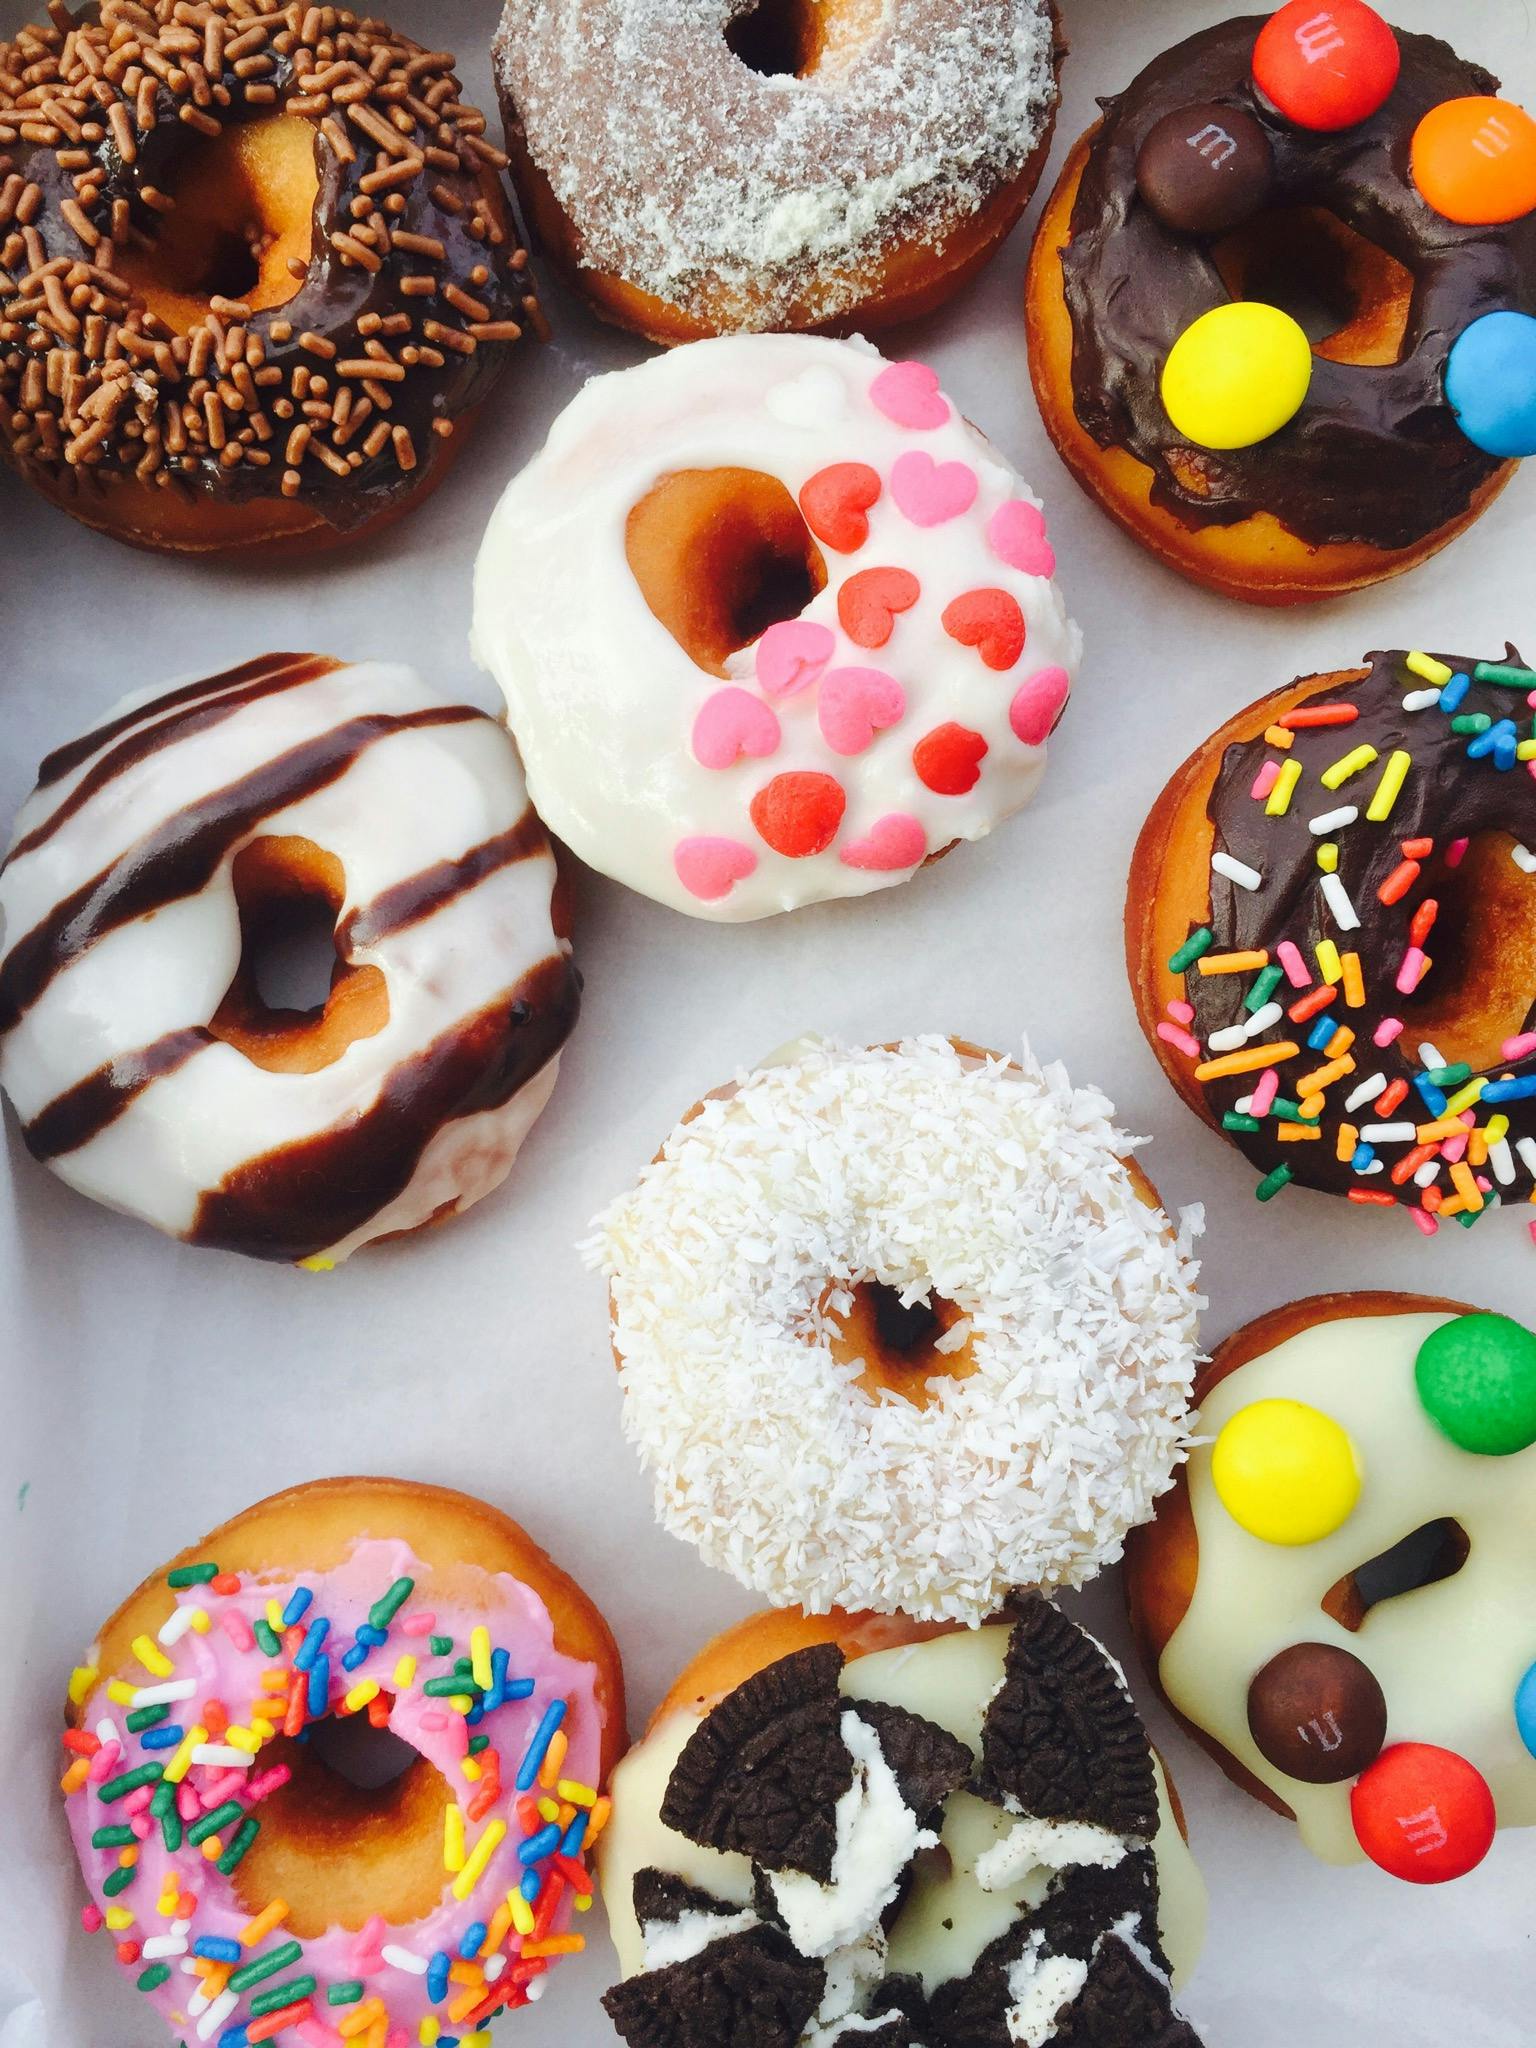 free-stock-photo-of-color-colorful-donuts